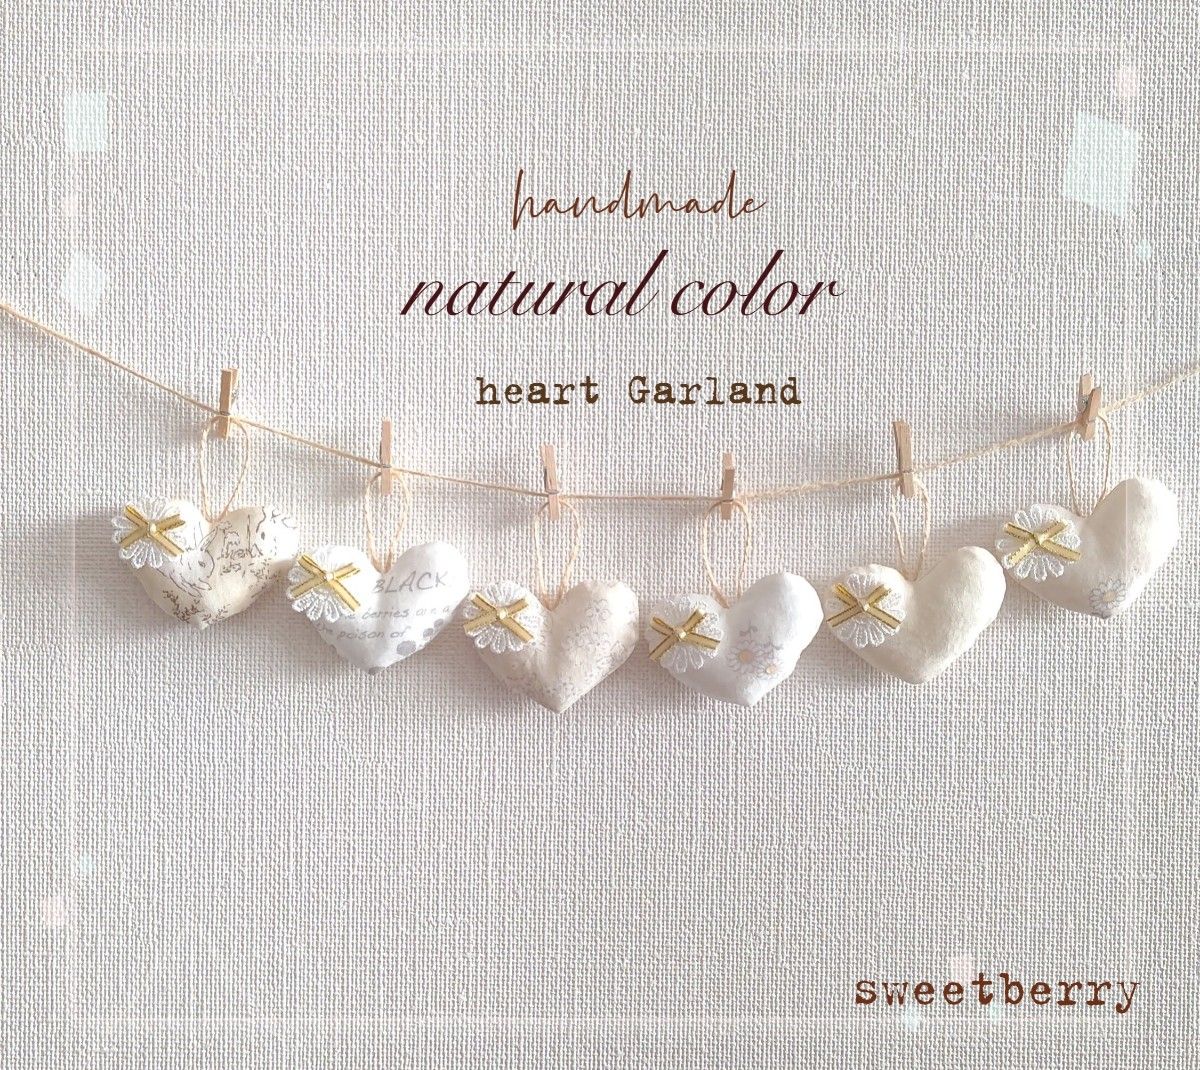 ☆*°natural color☆*°sweet ハートガーランド オフホワイトcolor